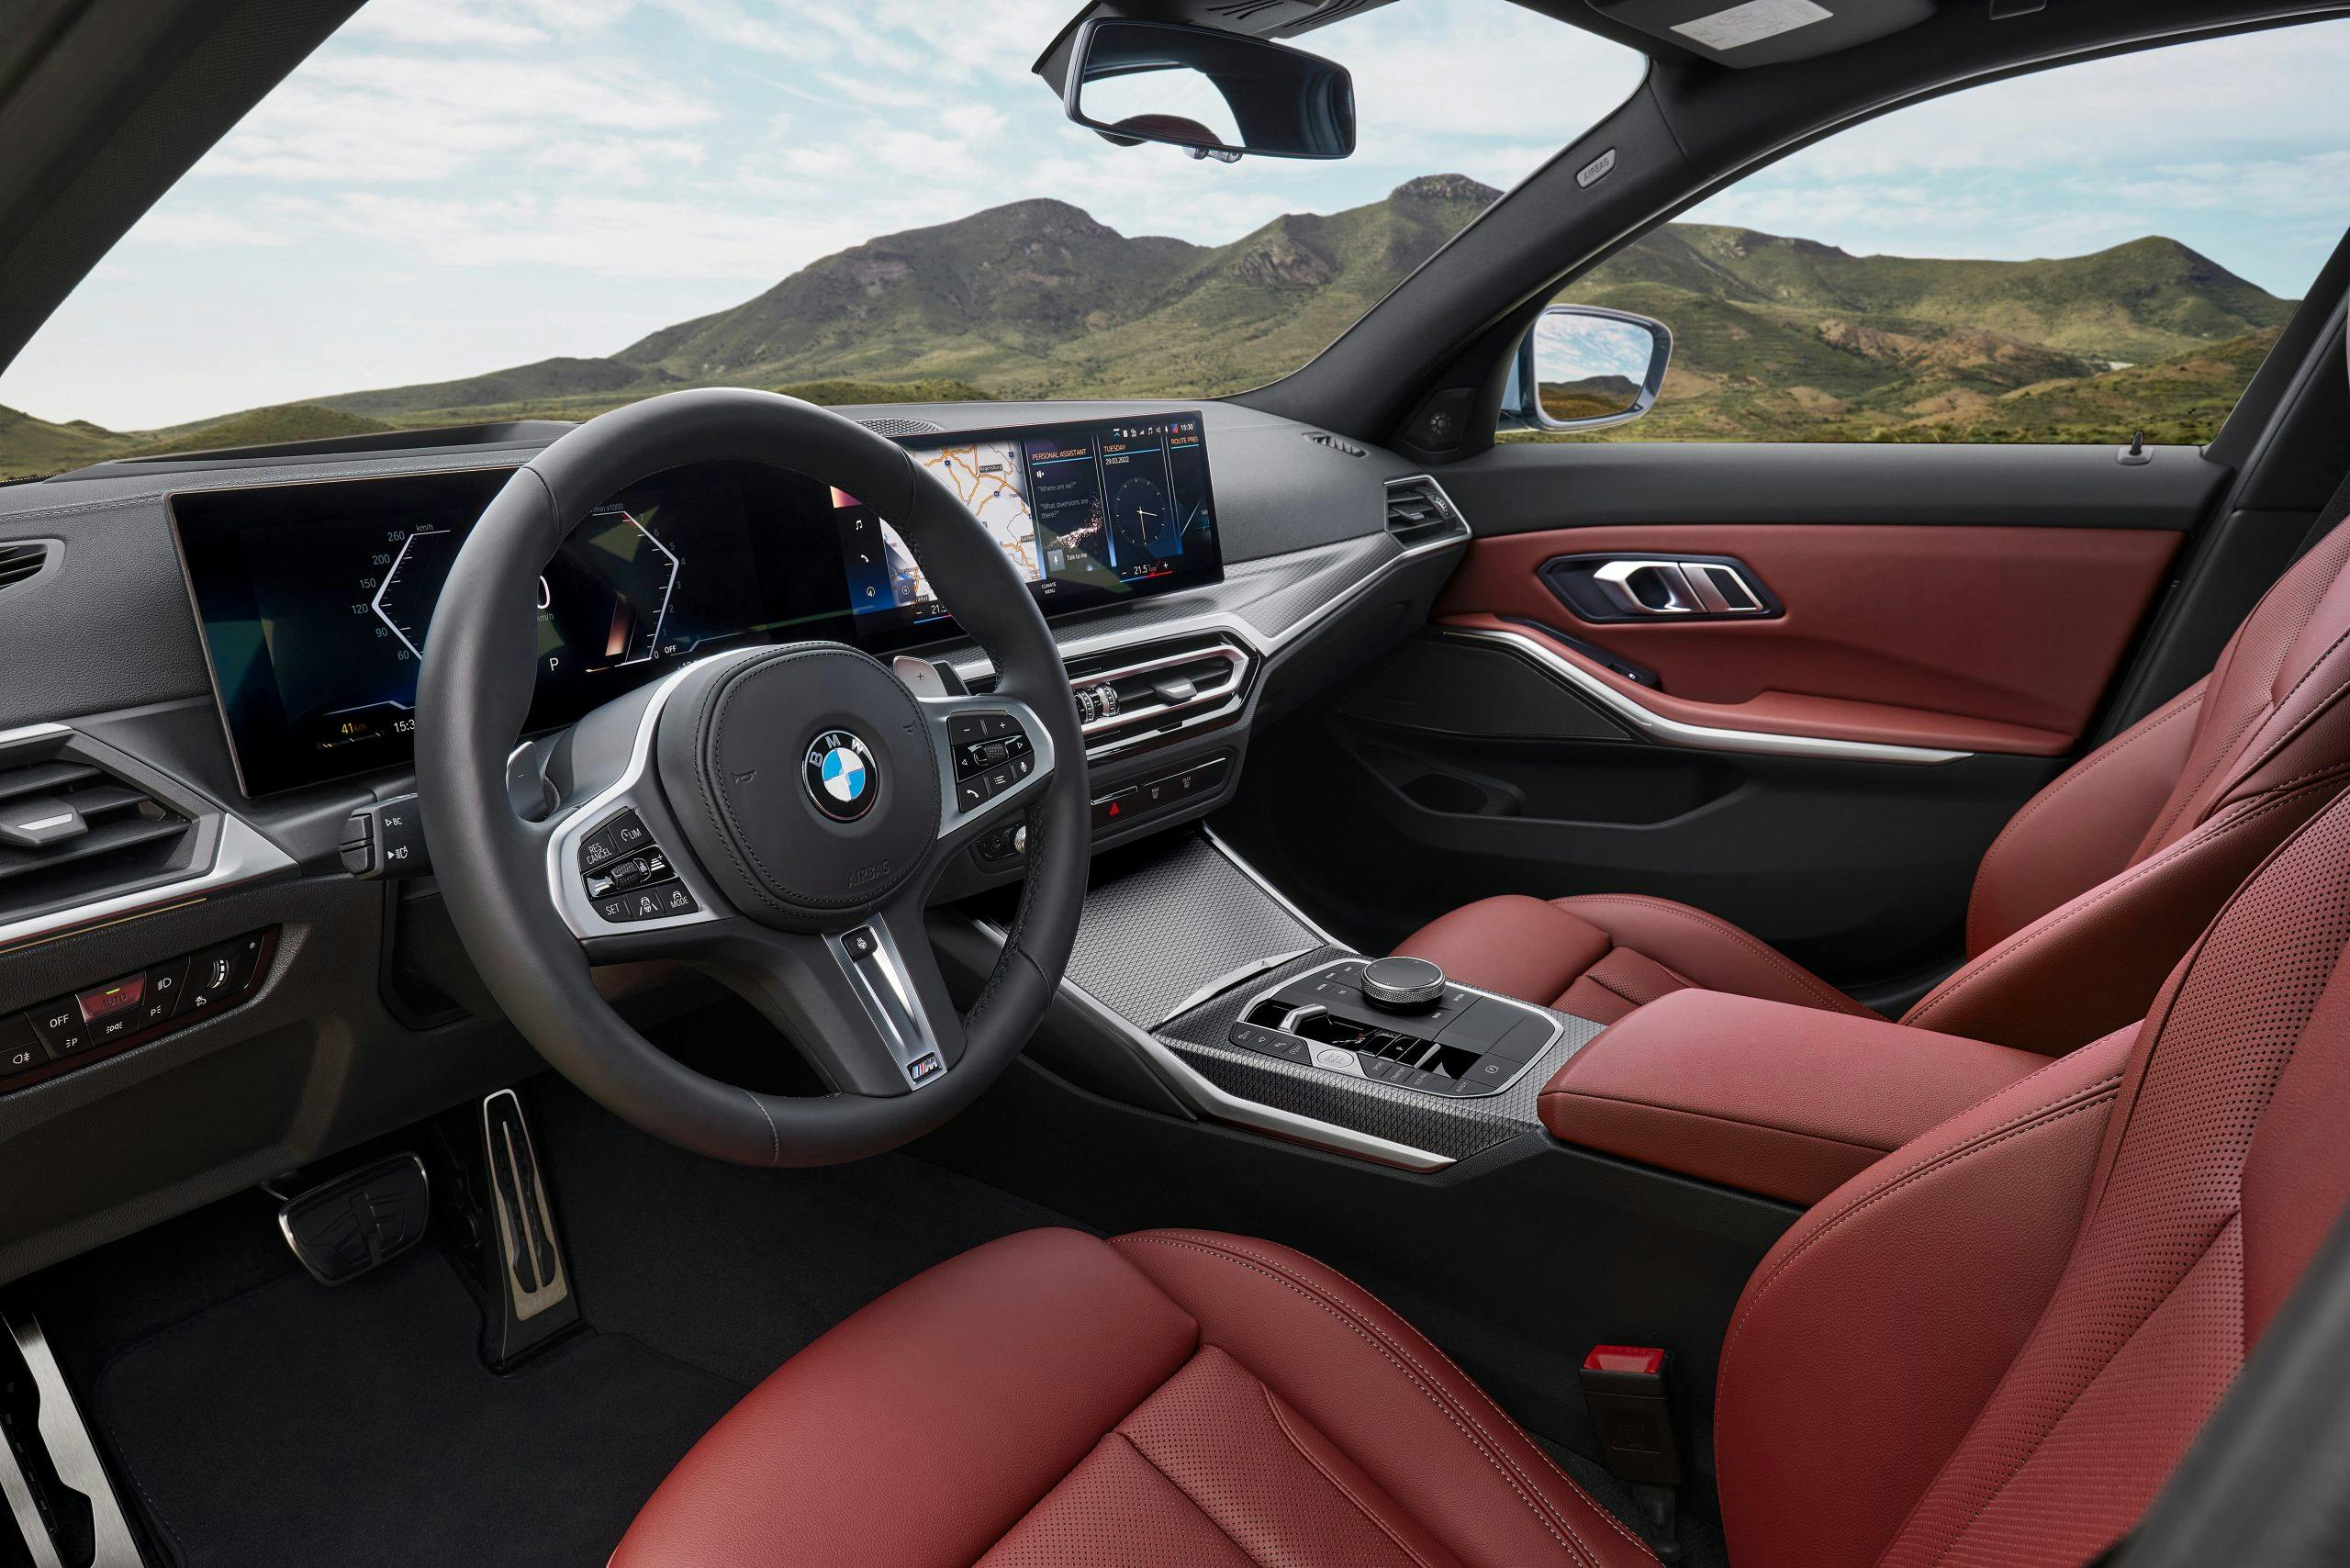 2022 BMW 3 series curved screen new interior